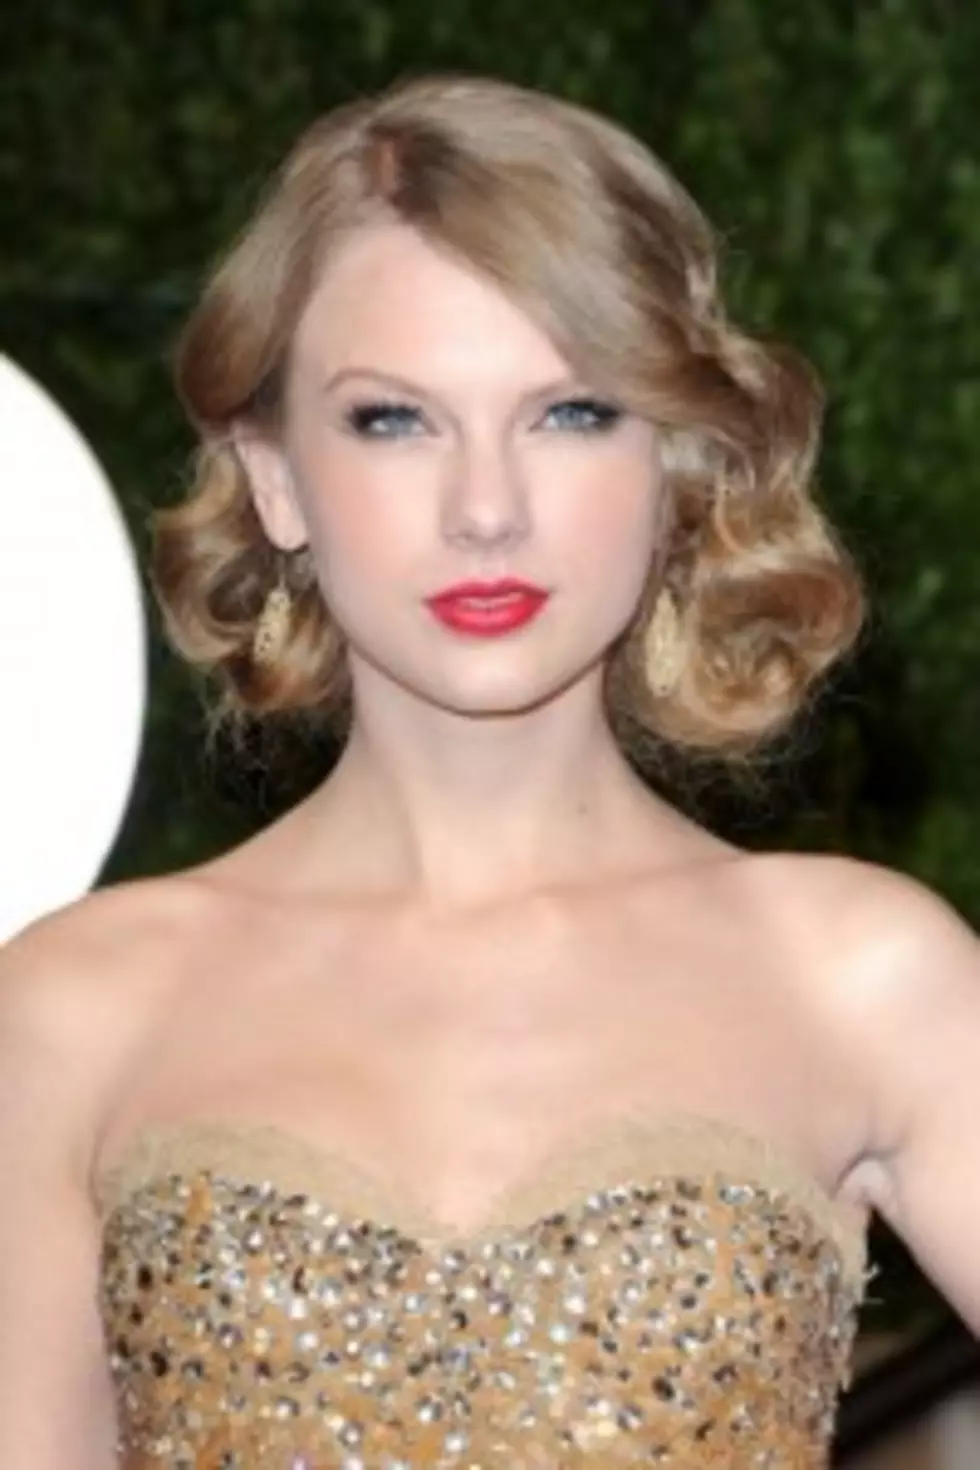 Taylor Swift Coming To Lubbock [VIDEO]